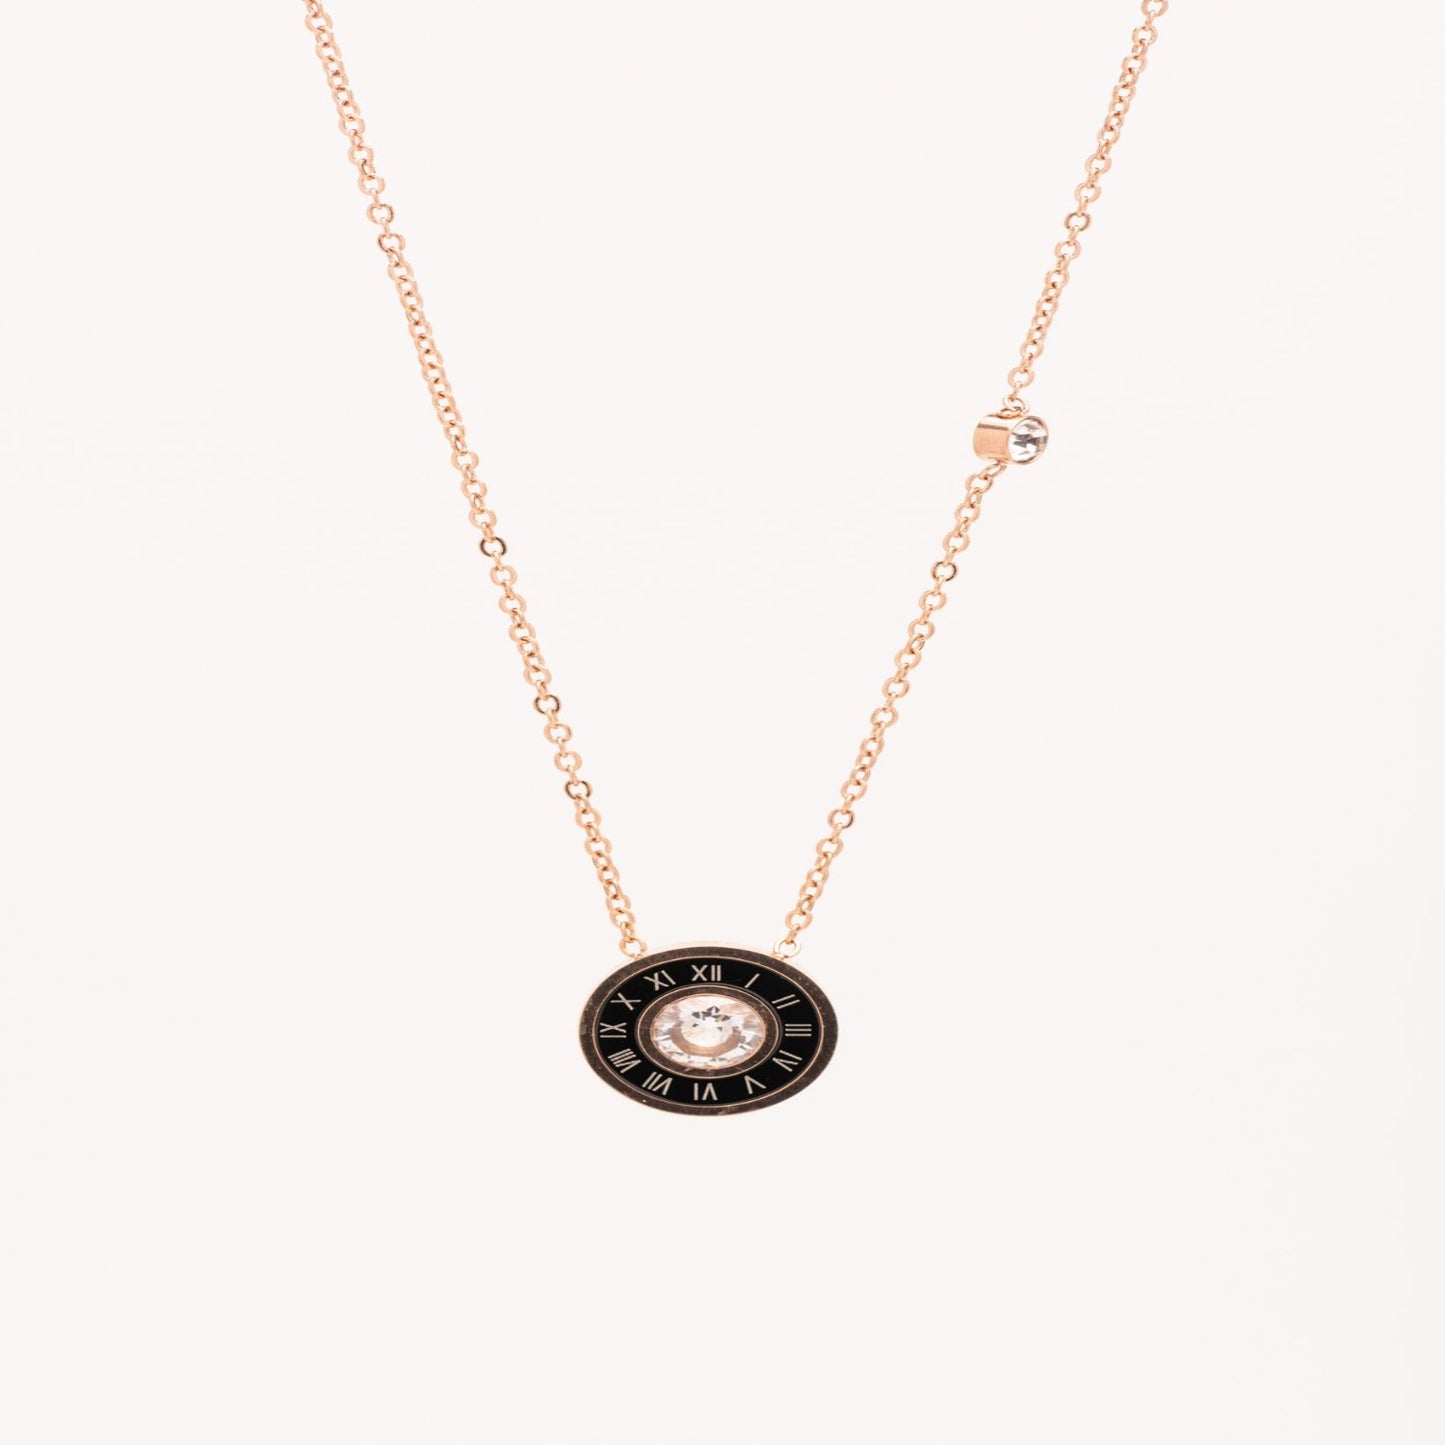 Roman numerals and Cubic Zirconia necklace in Rose gold.